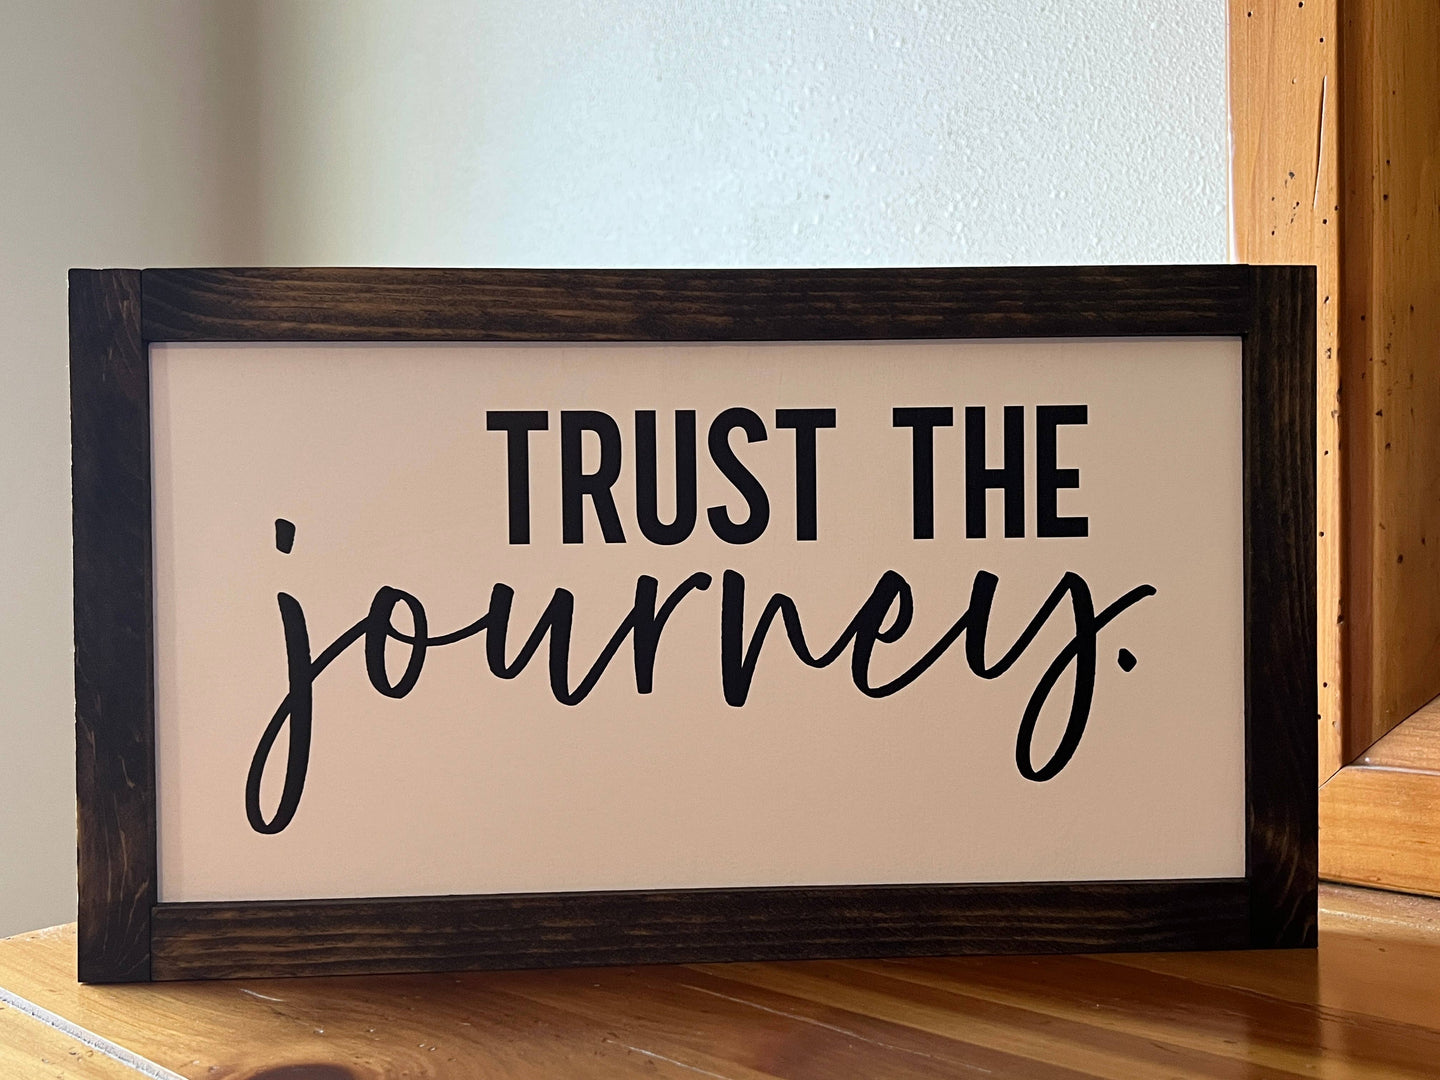 Trust The Journey: Black / Charcoal Background/White Lettering